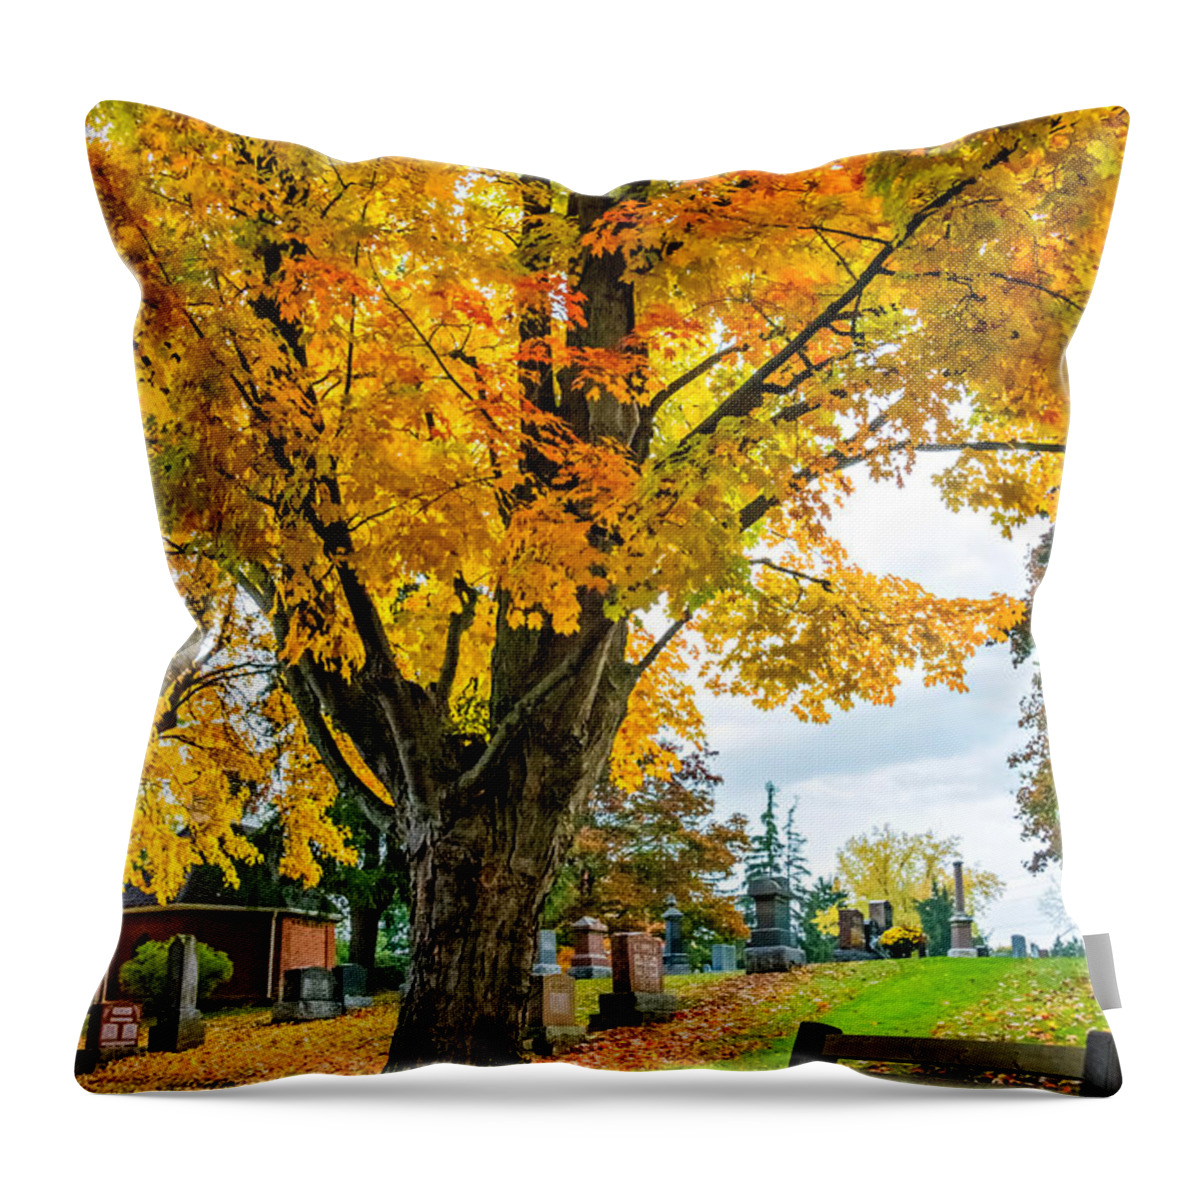 Andscape Throw Pillow featuring the photograph Contemplation Bench by Steve Harrington